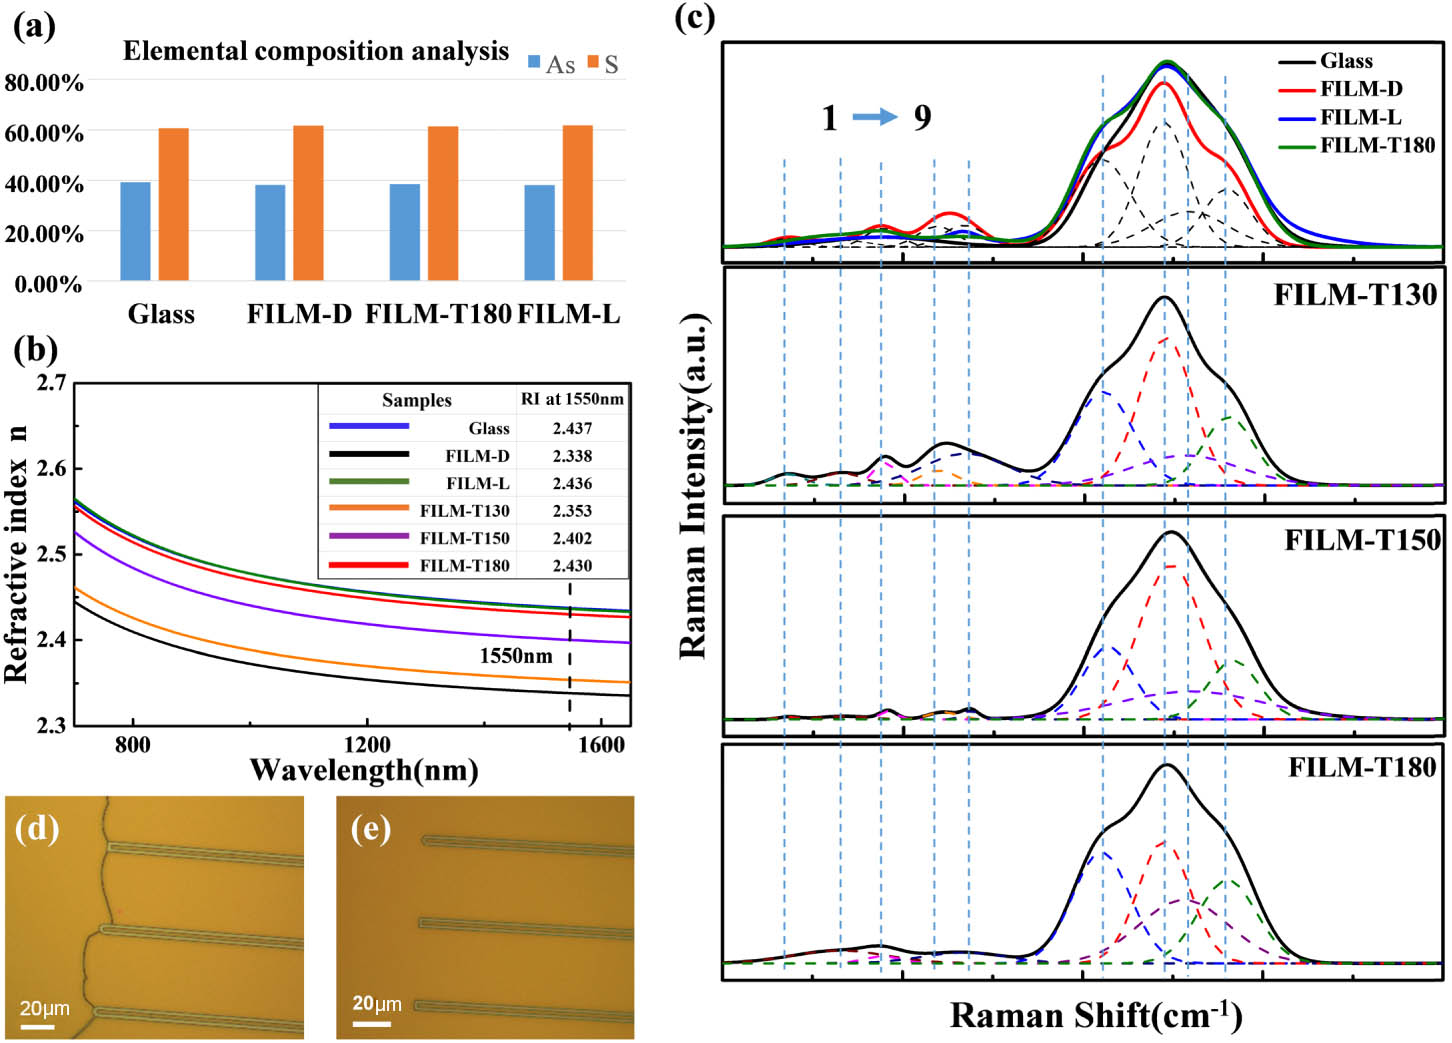 (a) Composition of As2S3 bulk glass, FILM-D, FILM-L, and T180. (b) RI of FILM-D, FILM-L, T130, T150, and T180 as well as the As2S3 bulk glass. (c) Raman spectra of FIML-D, FILM-L, the glass, and films T130, T150, and T180. (Note: FILM-L annealed at the power densities of 200 mW/cm2.) SEM of the waveguide after the electron-beam resist development step with different films: (d) FILM-T; (e) FILM-L.